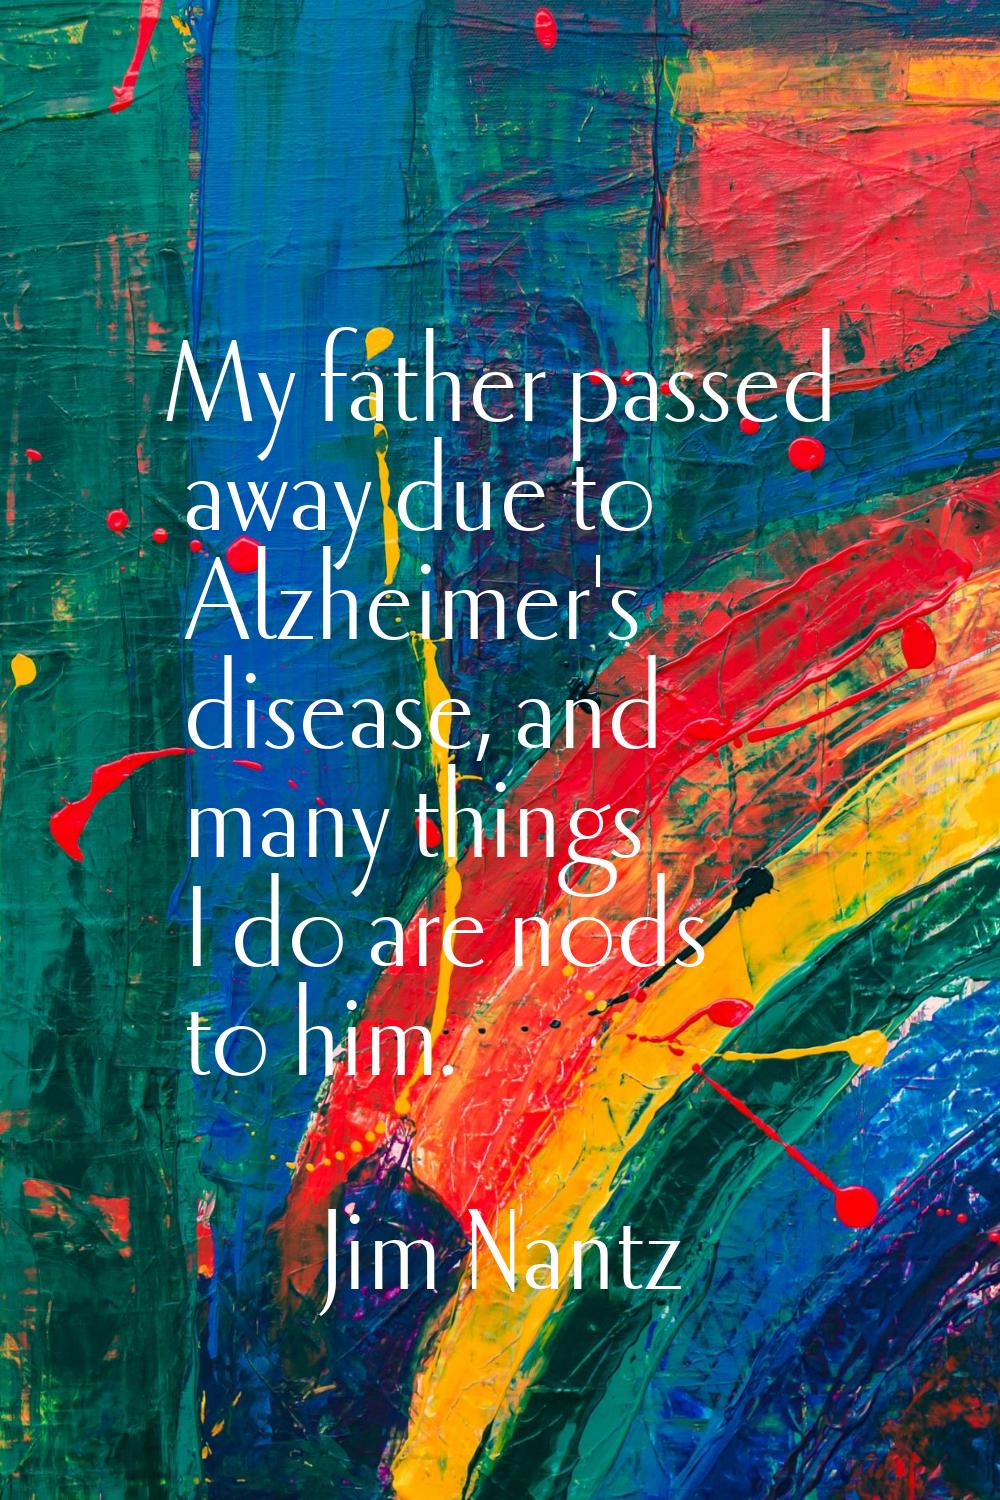 My father passed away due to Alzheimer's disease, and many things I do are nods to him.